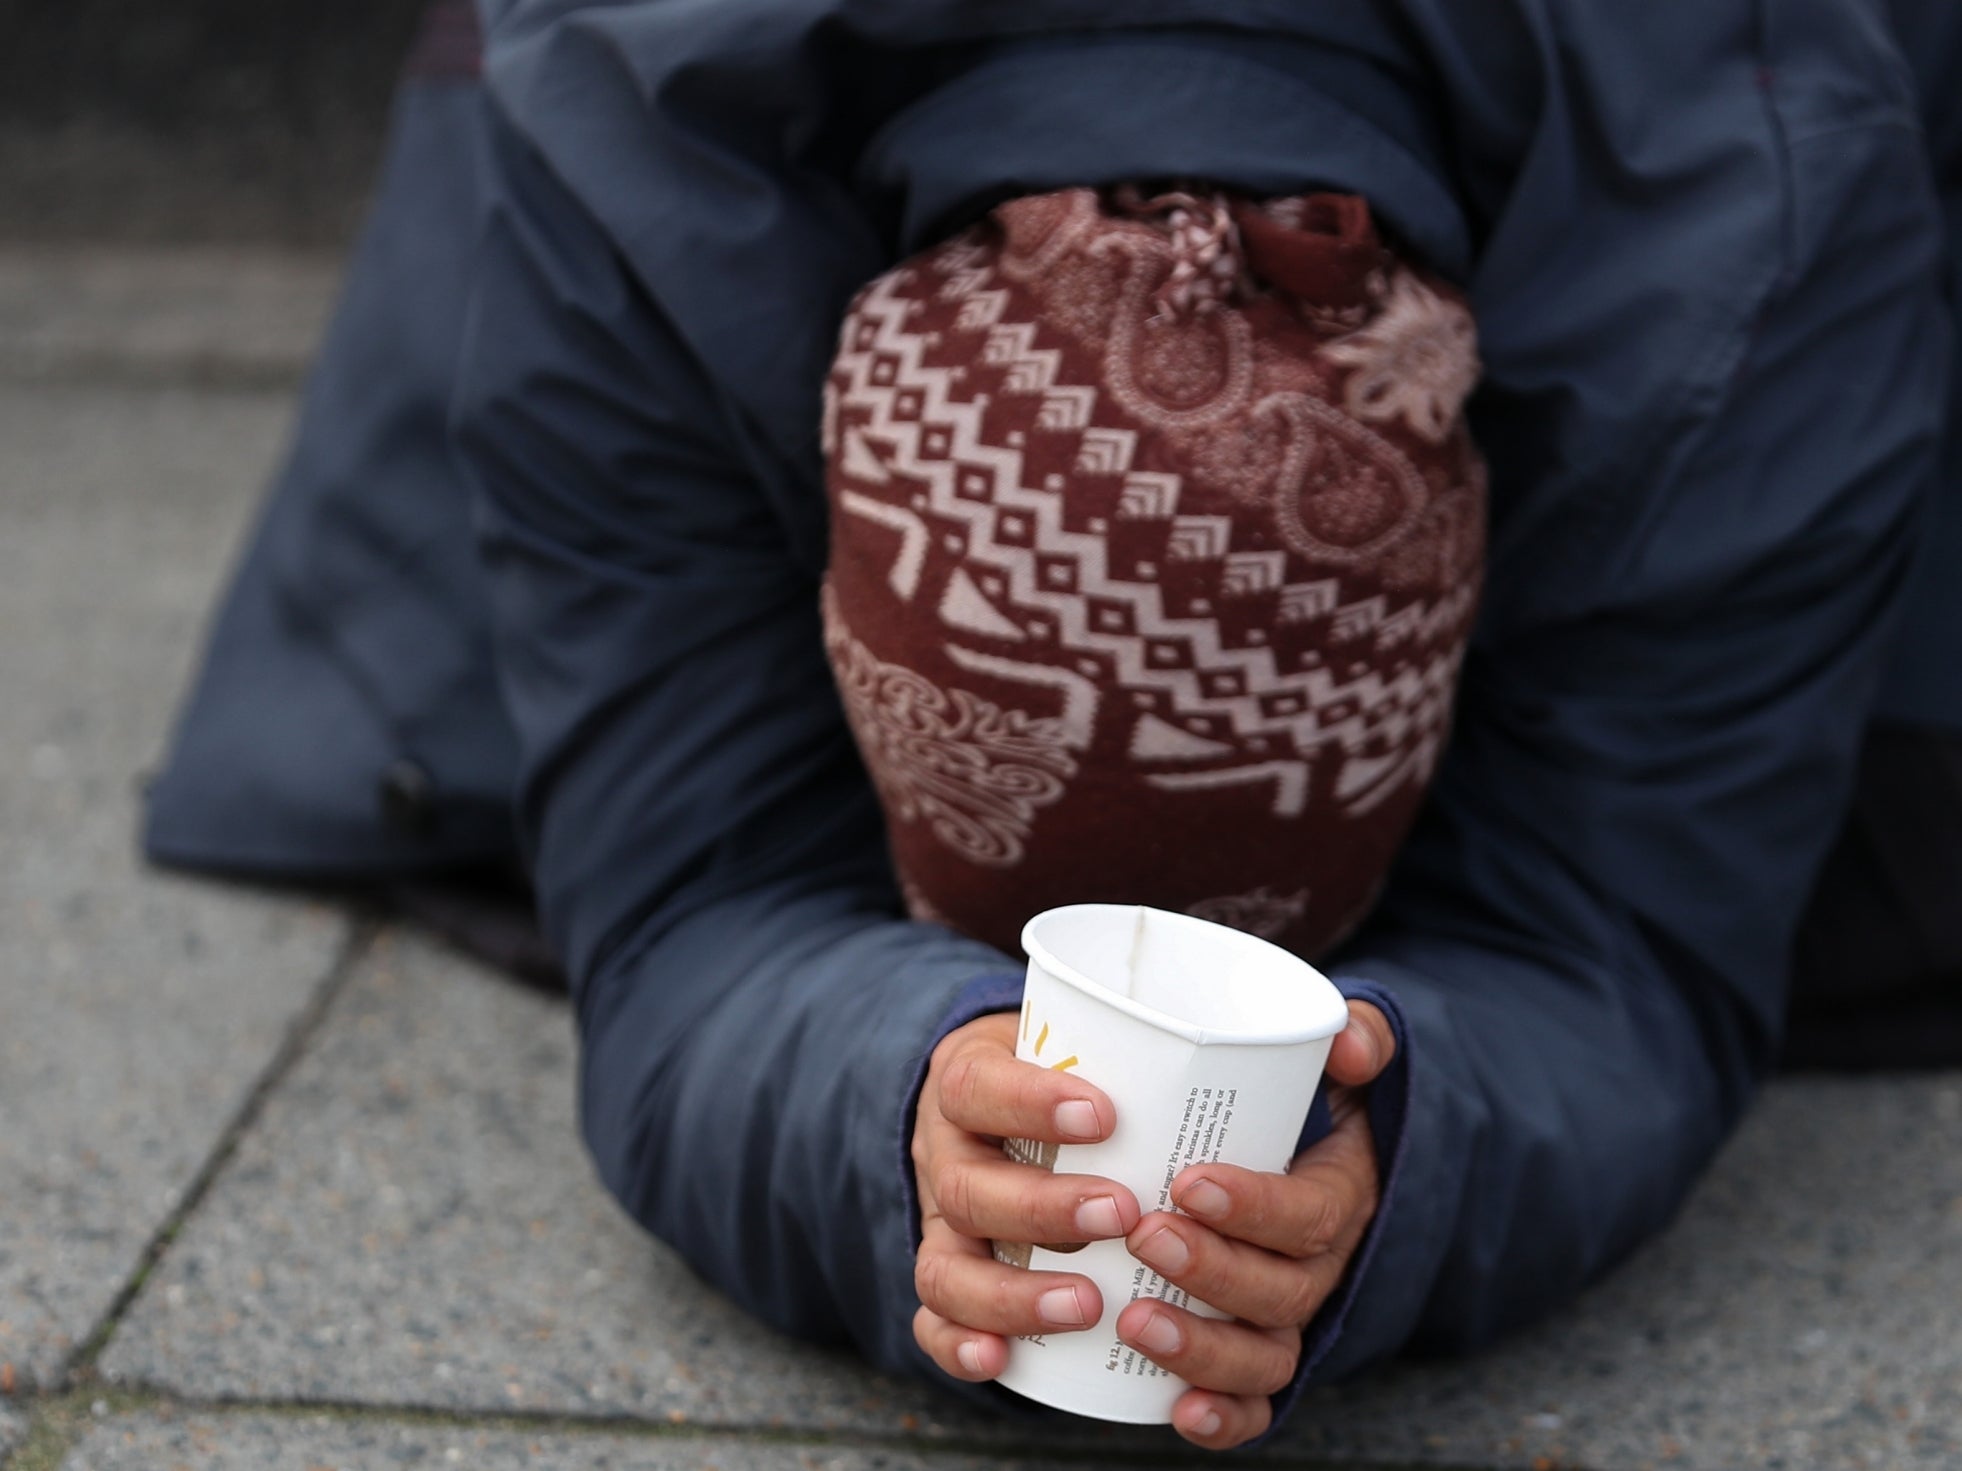 &apos;Homeless people need help, not punishment&apos;: Pressure mounts to repeal Vagrancy Act